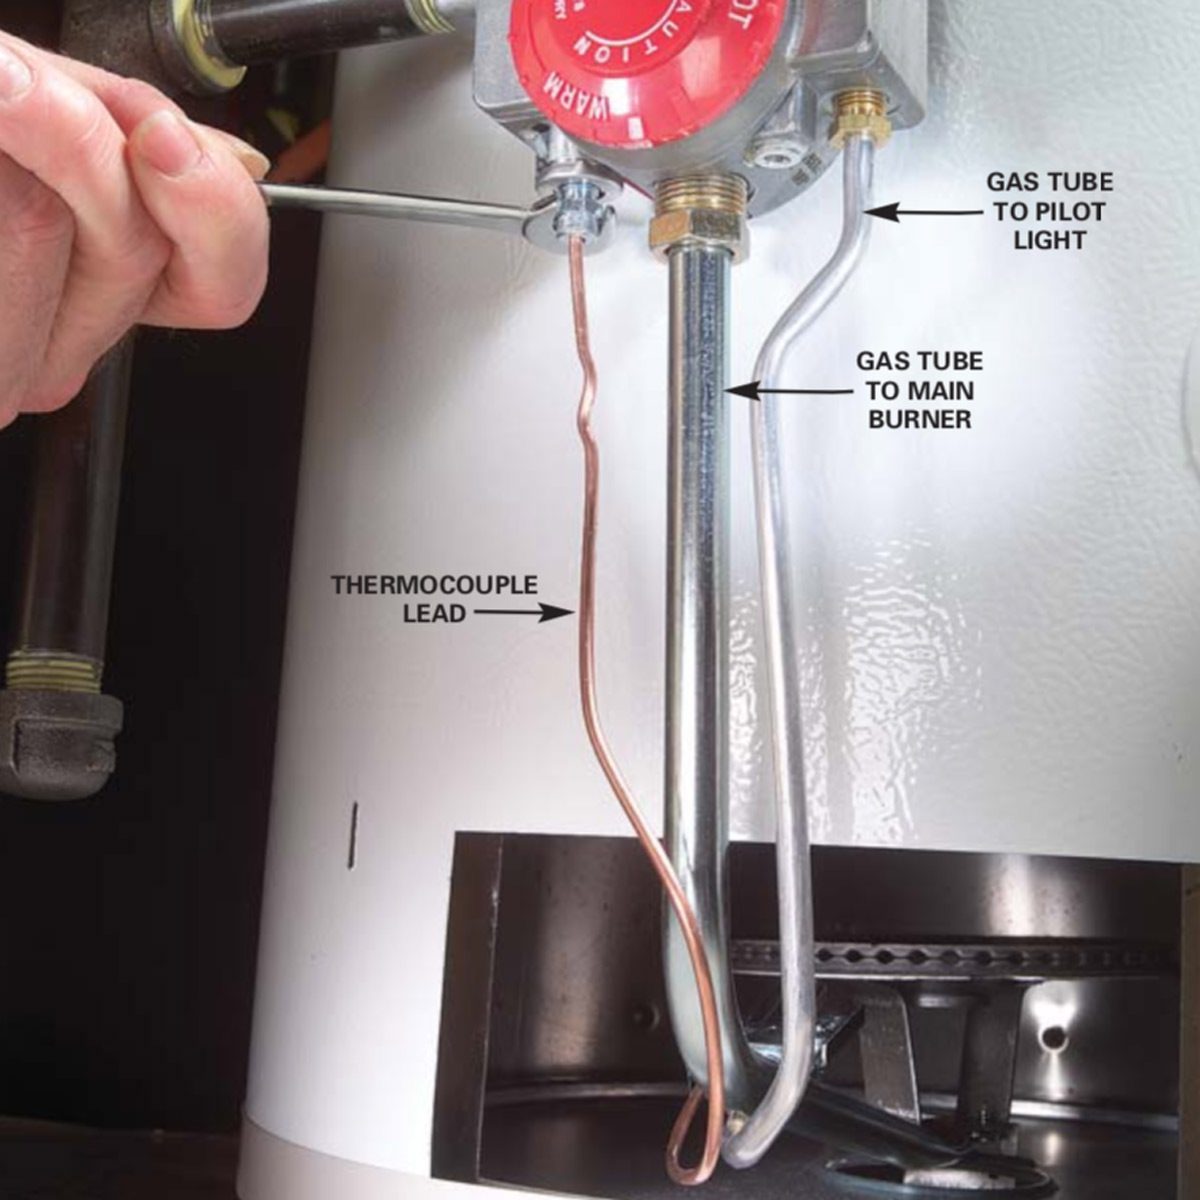 Gas Water Heater pilot goes out if temperature set above warm